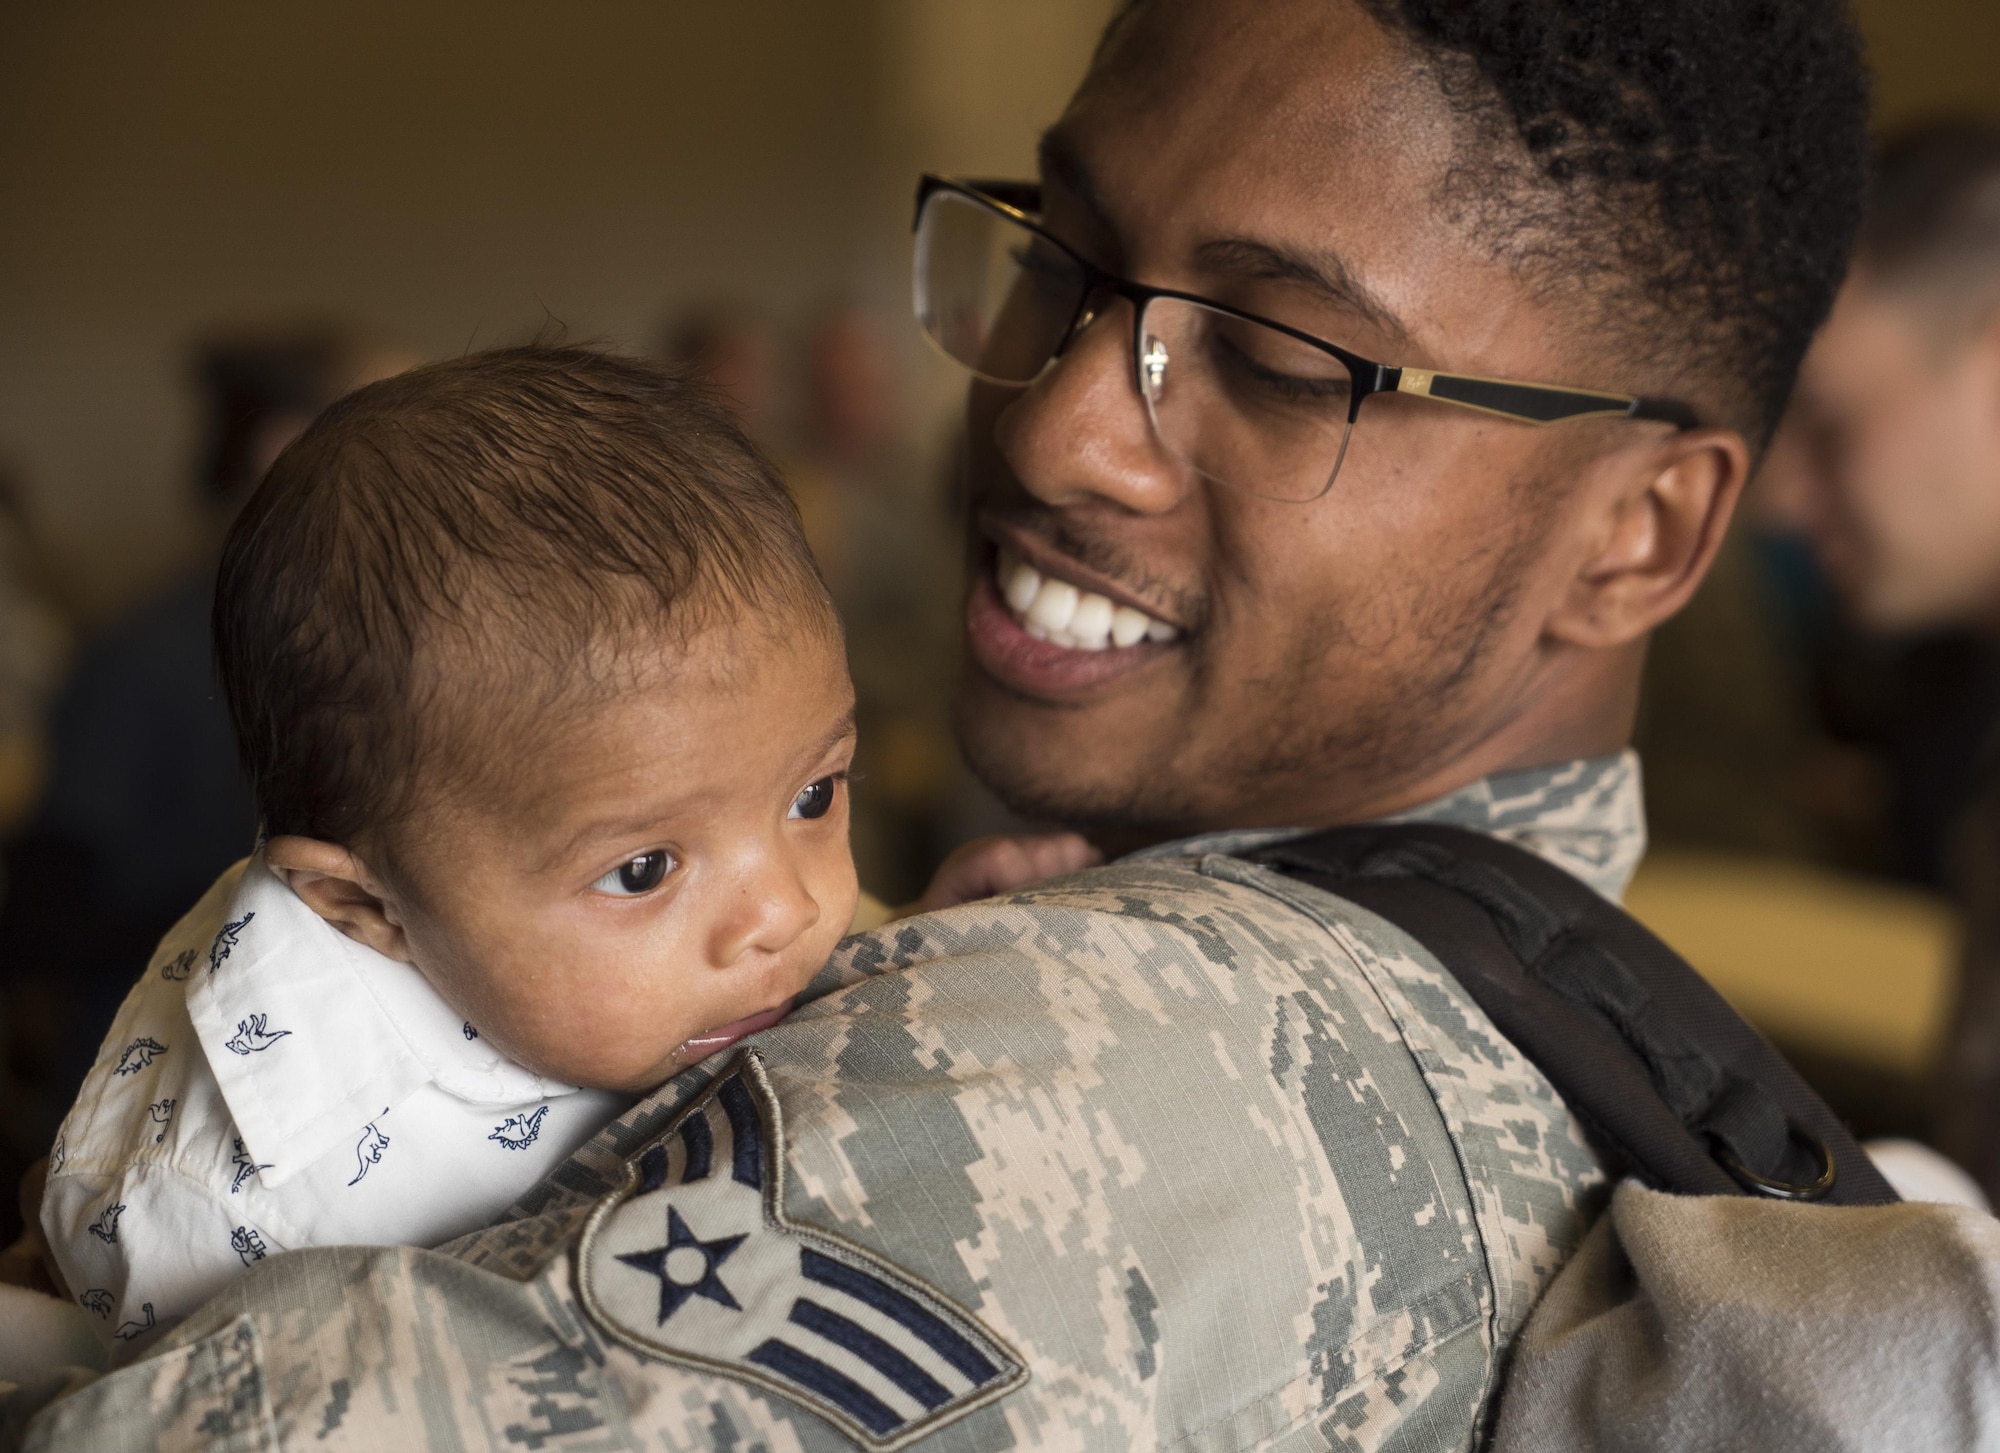 Senior Airman Aaron Wilson, holds his son, Adrian, for the first time at Mountain Home Air Force Base, Idaho, April 22, 2017. Adrian, two months old, was born while Wilson was deployed to Southwest Asia for six months. (U.S. Air Force photo/Staff Sgt. Samuel Morse)